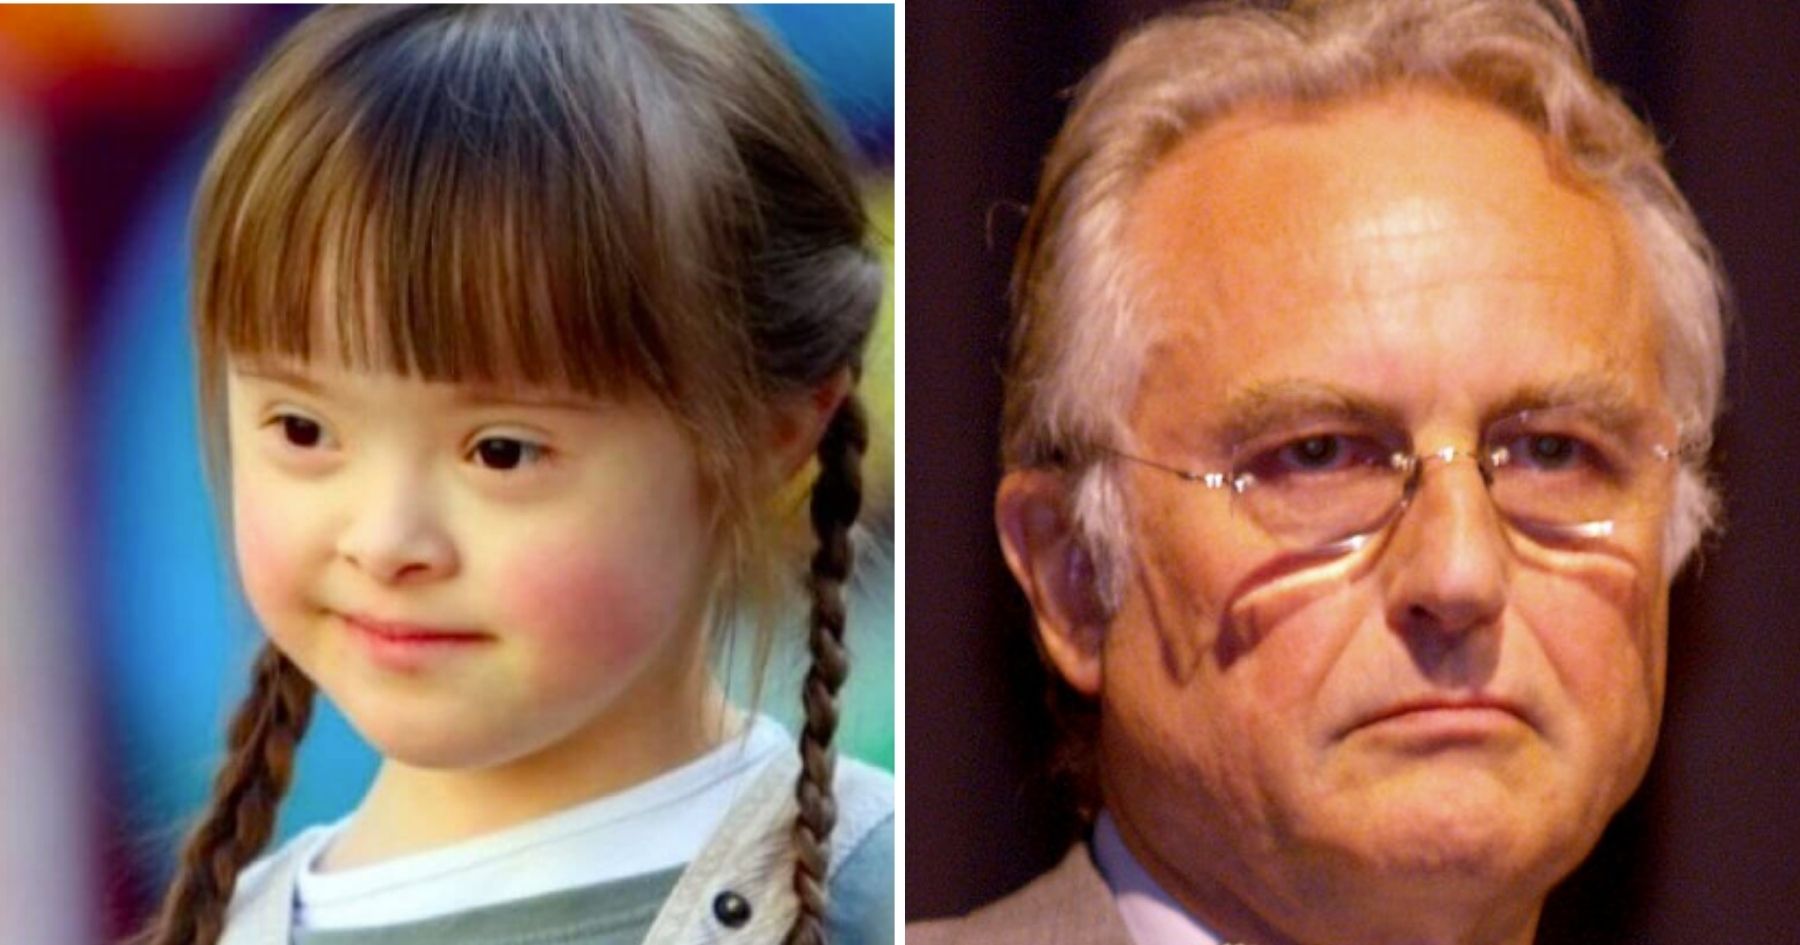 Richard Dawkins claims it is 'sensible' to abort babies who have Down’s syndrome or are blind or deaf